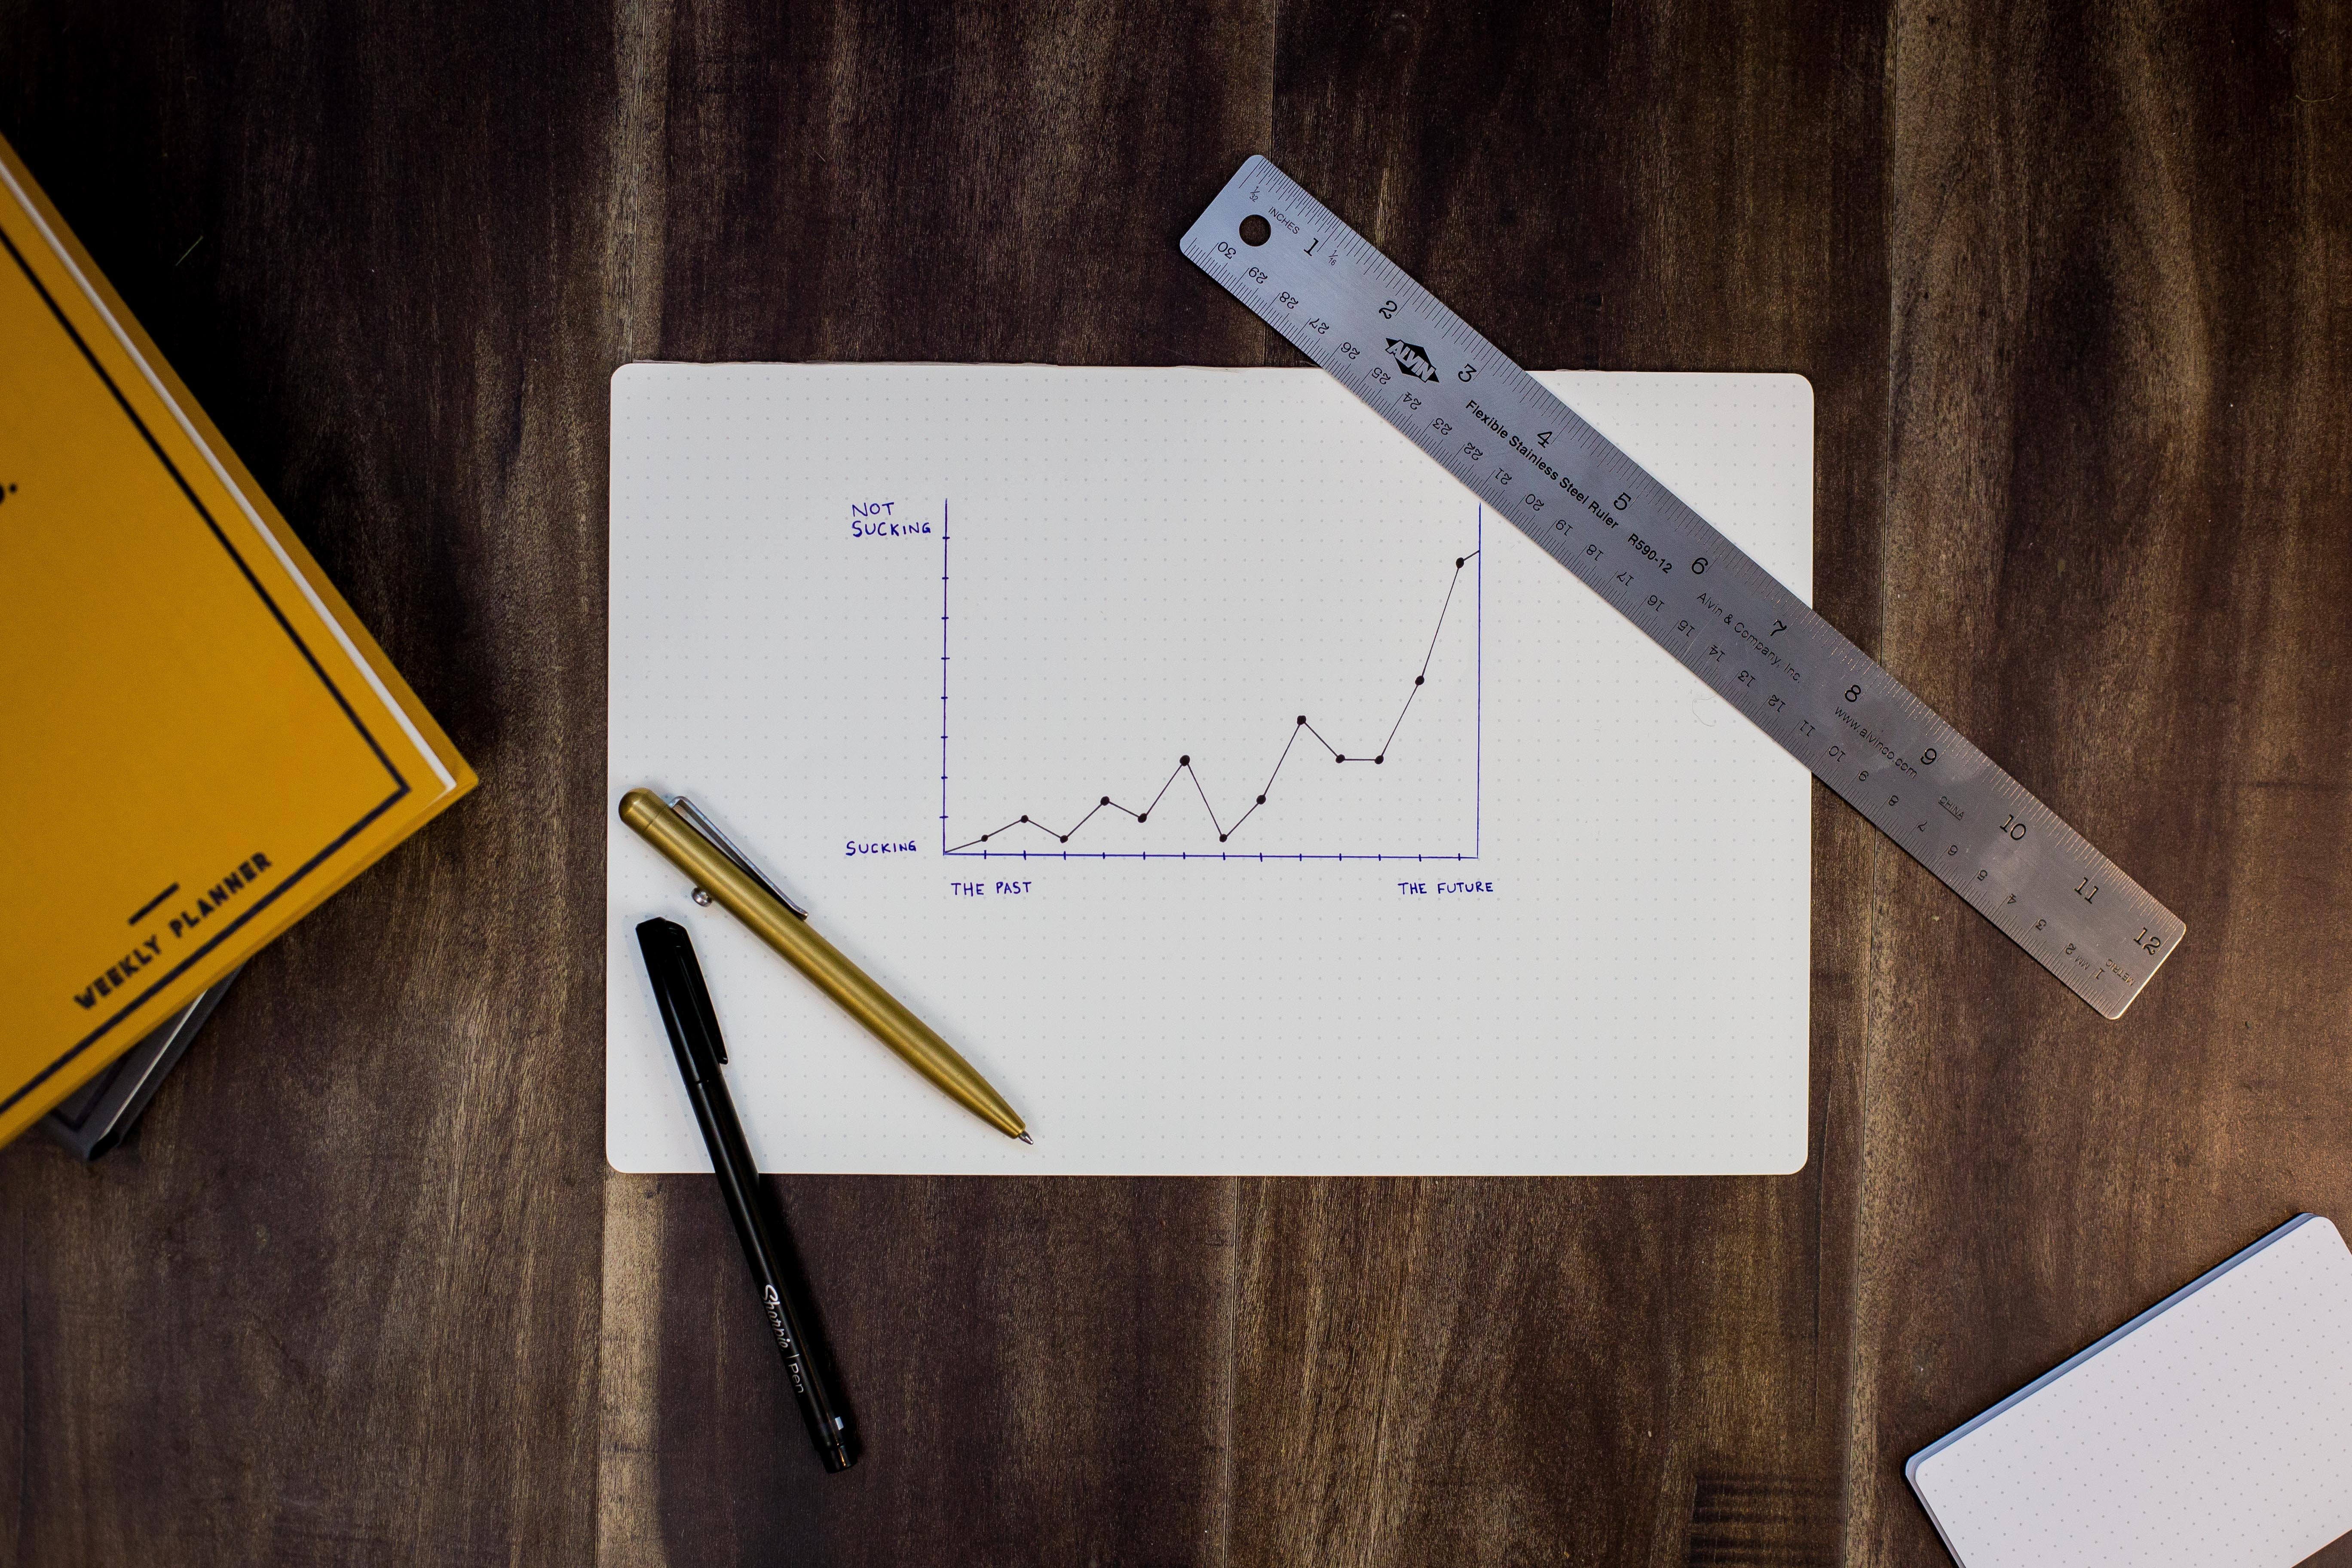 Get ahead of changes in your market, image featuring a ruler, paper, and pens on a wooden desk